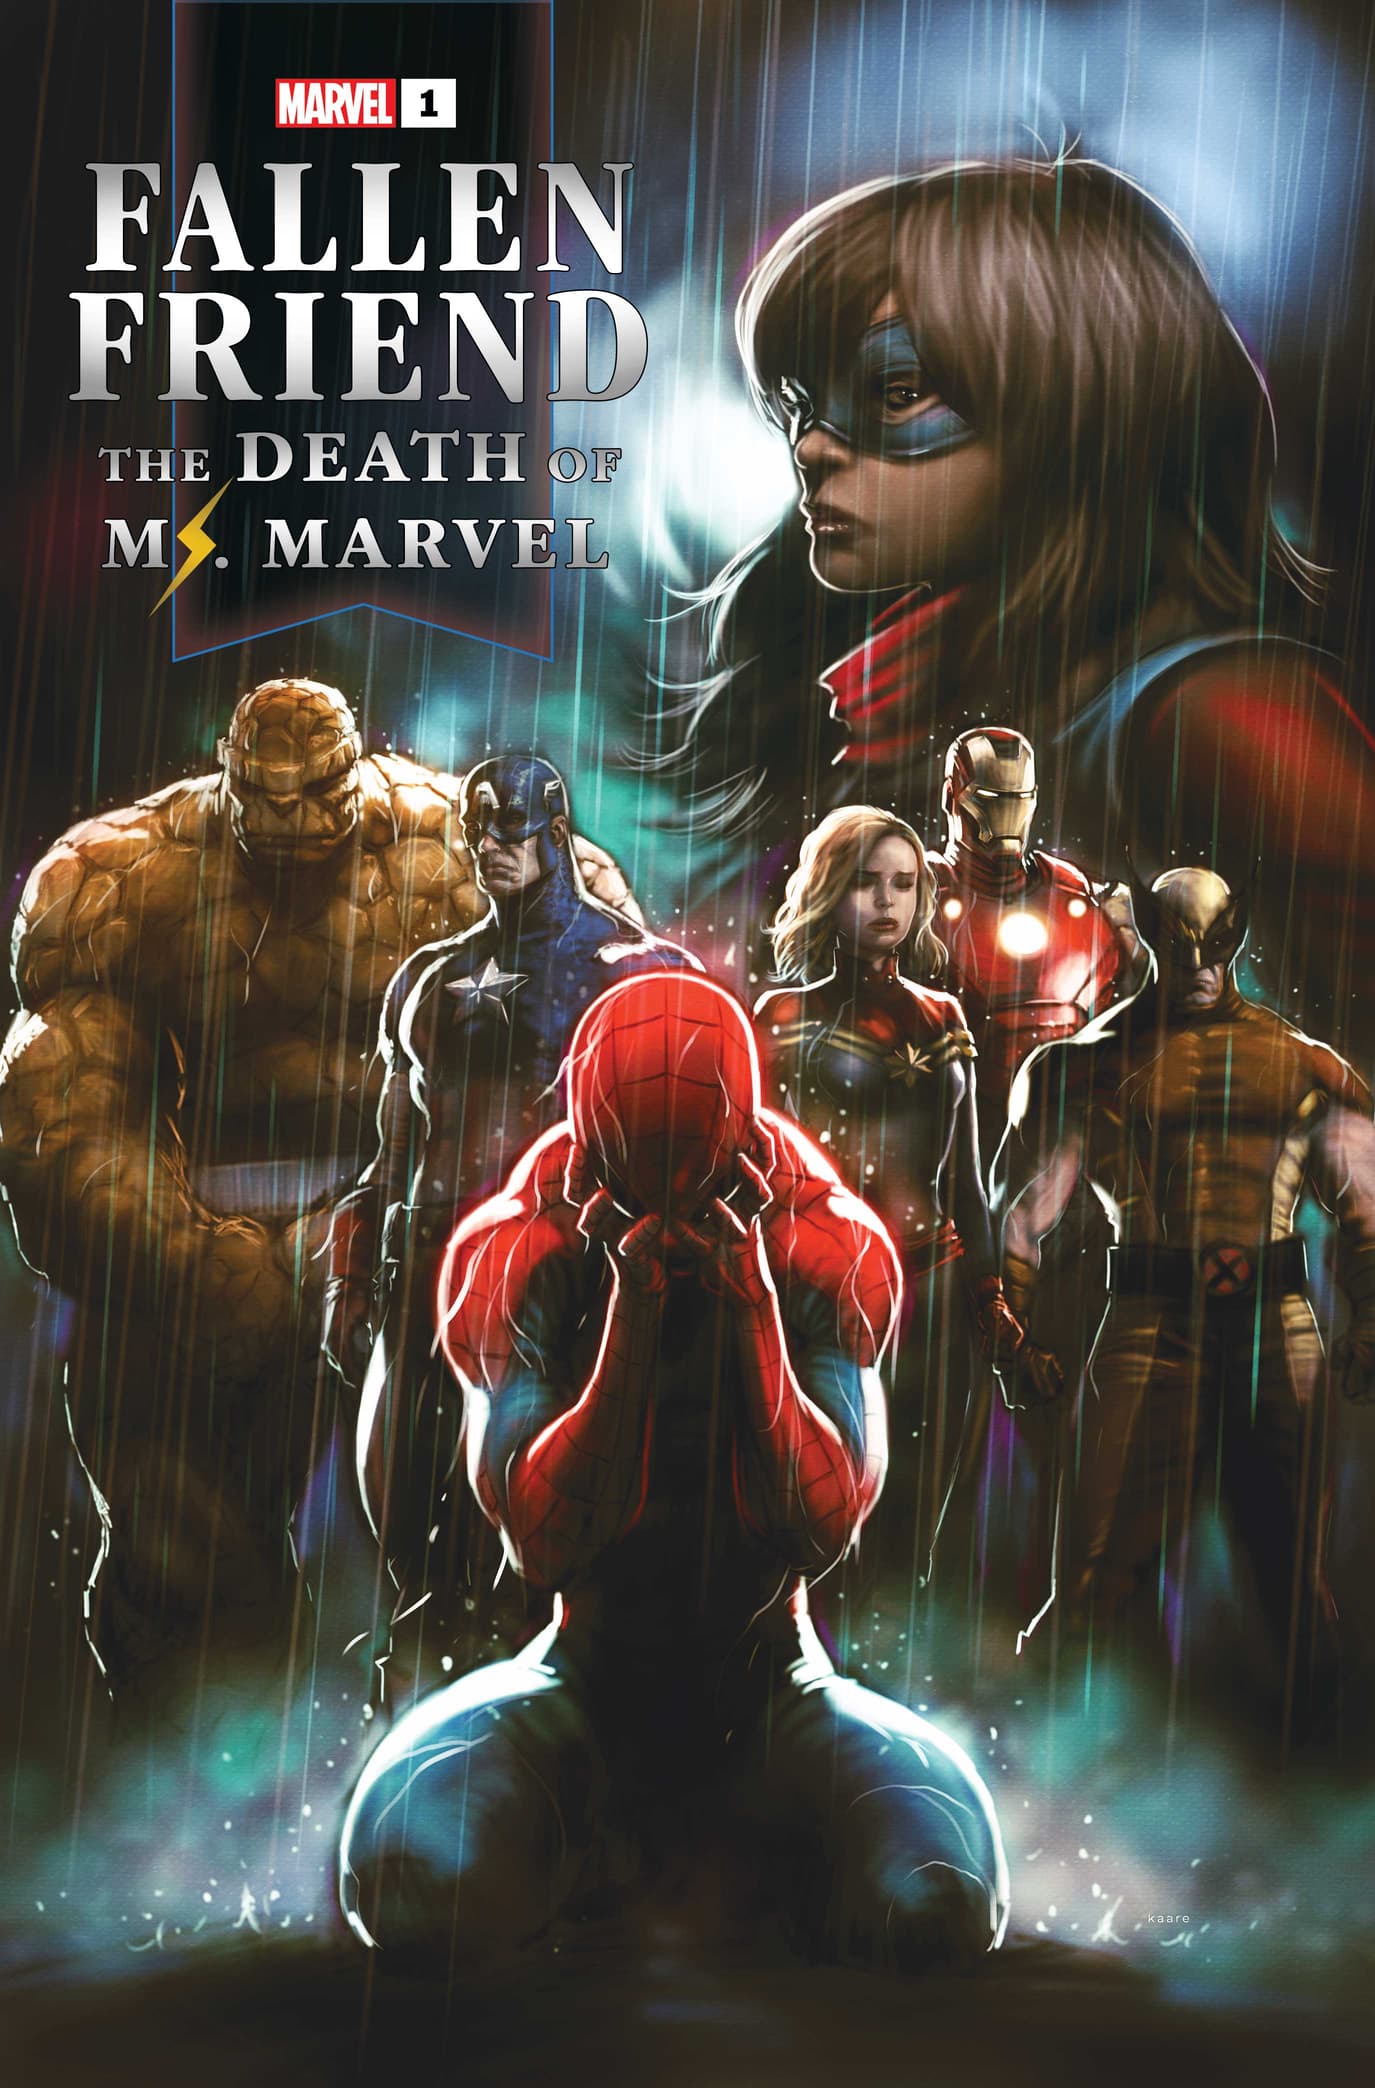 FALLEN FRIEND: THE DEATH OF MS. MARVEL #1 cover by Kaare Andrews